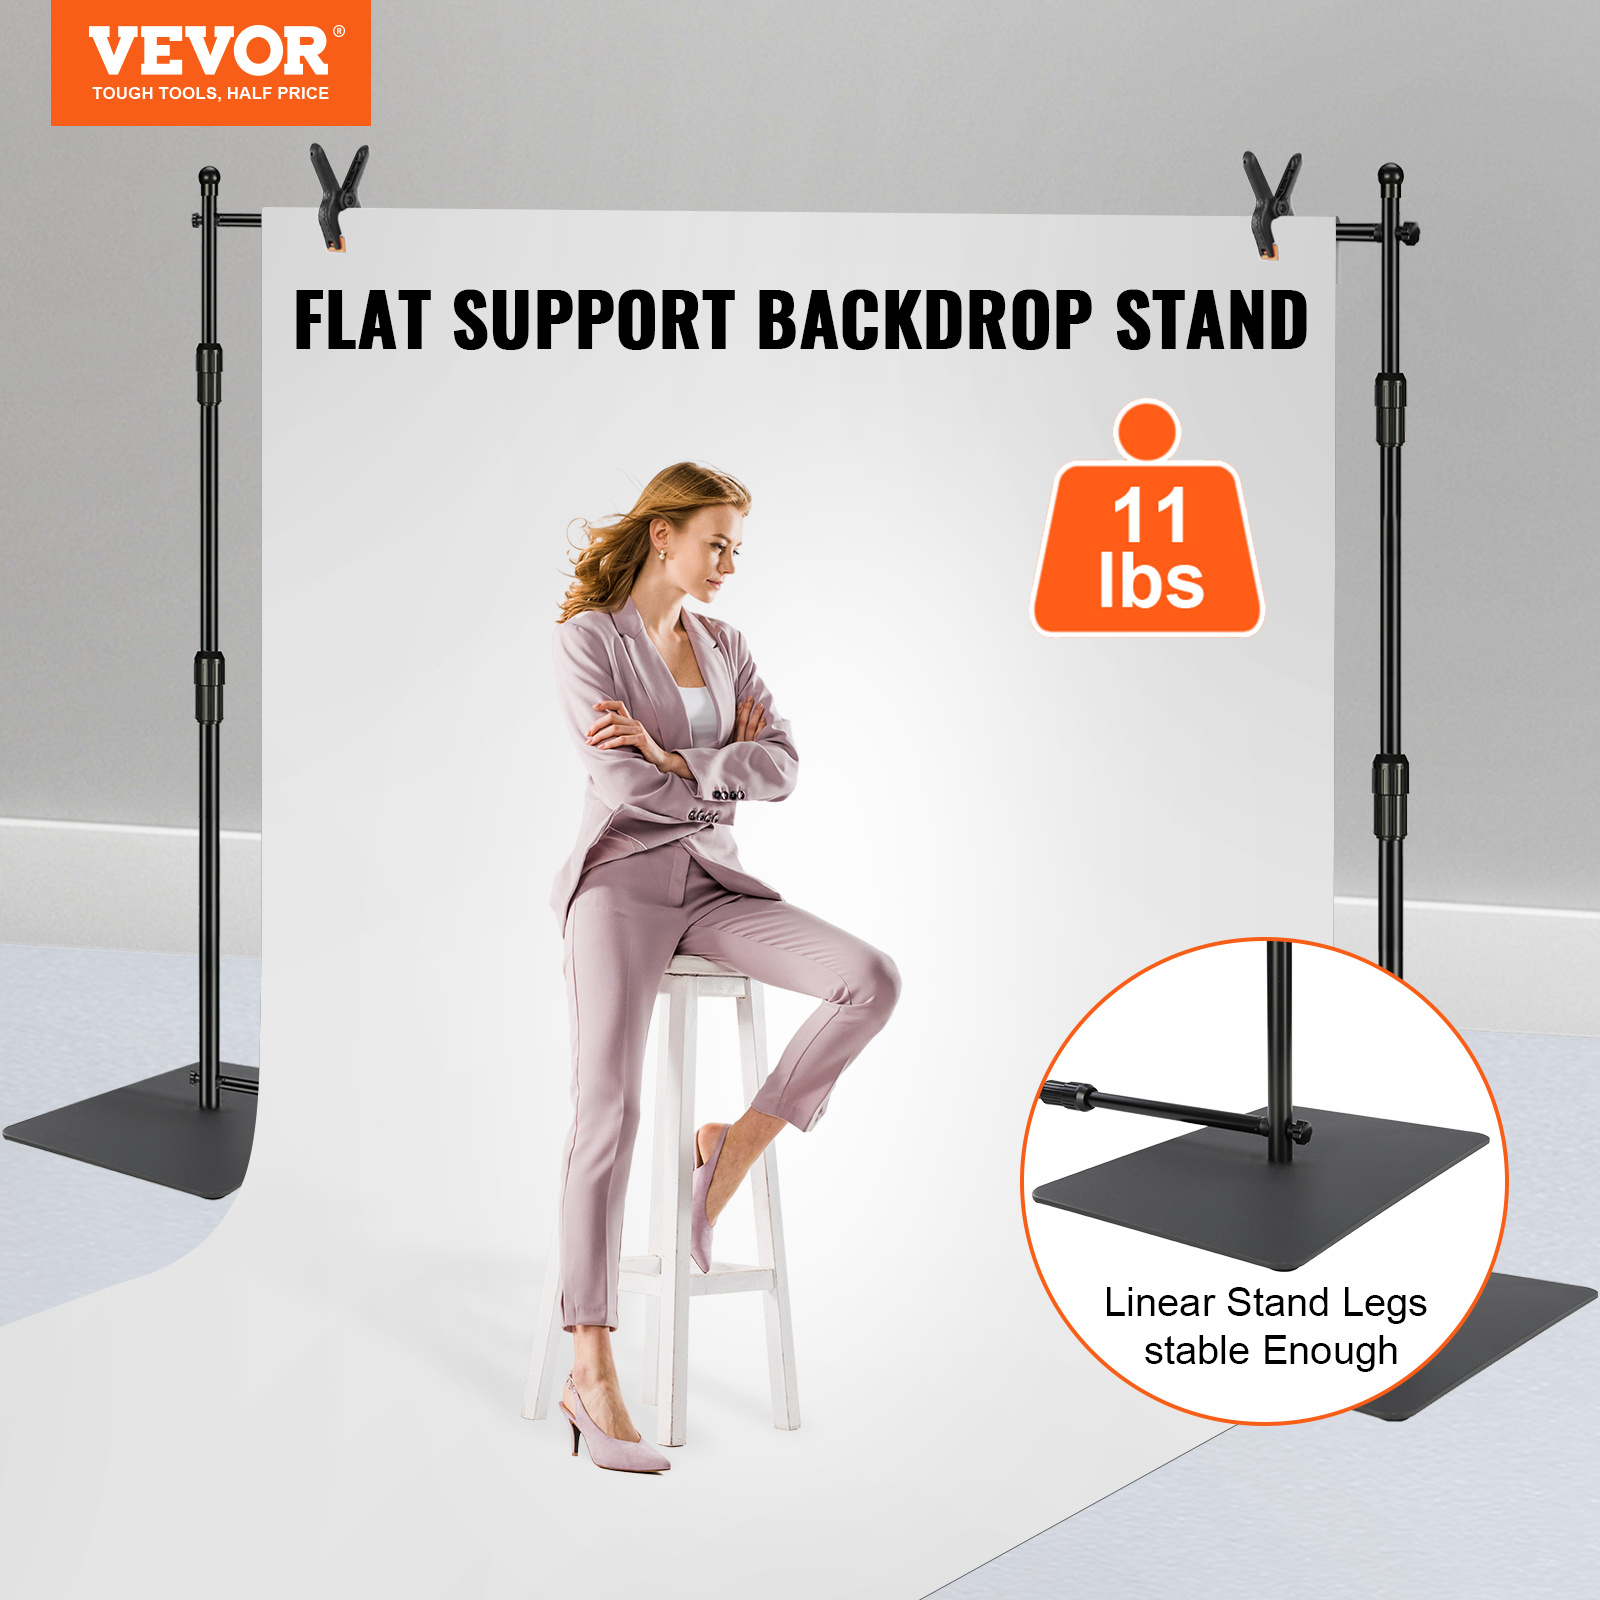 

Vevor 10ft X10ft Pipe And Drape Kit, Heavy Duty Backdrop Stand With Carbon Steel Base, Adjustable Backdrop Support With 2 Clamps And A Carry Bag For Wedding, Party, Event, Photography And Exhibition